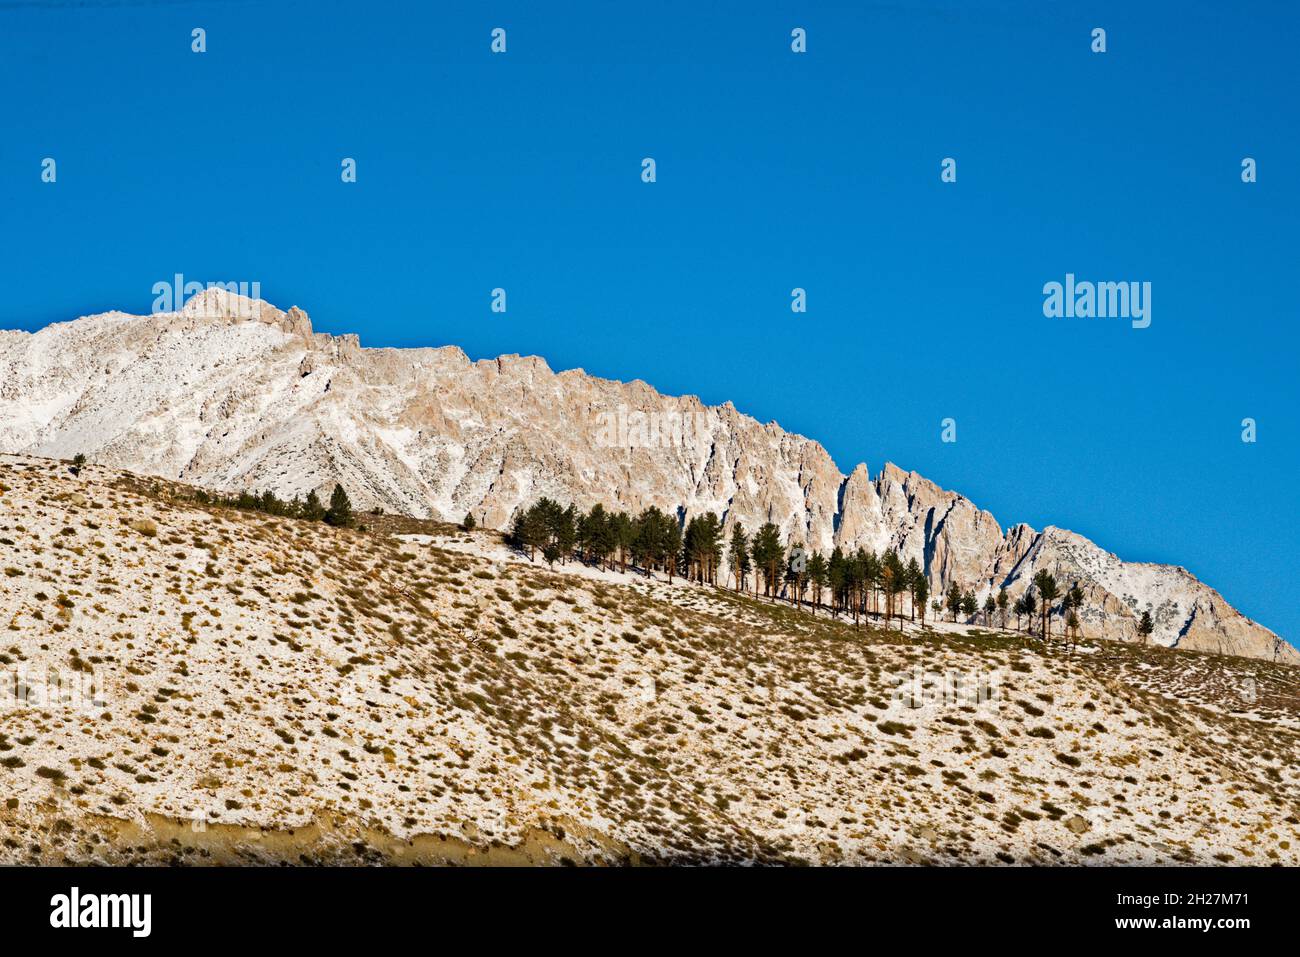 Landscape defining the texture & patterns of Sierra Nevada mountain range in the morning autumn air & rich blue skies= success, permenace, excitemen Stock Photo